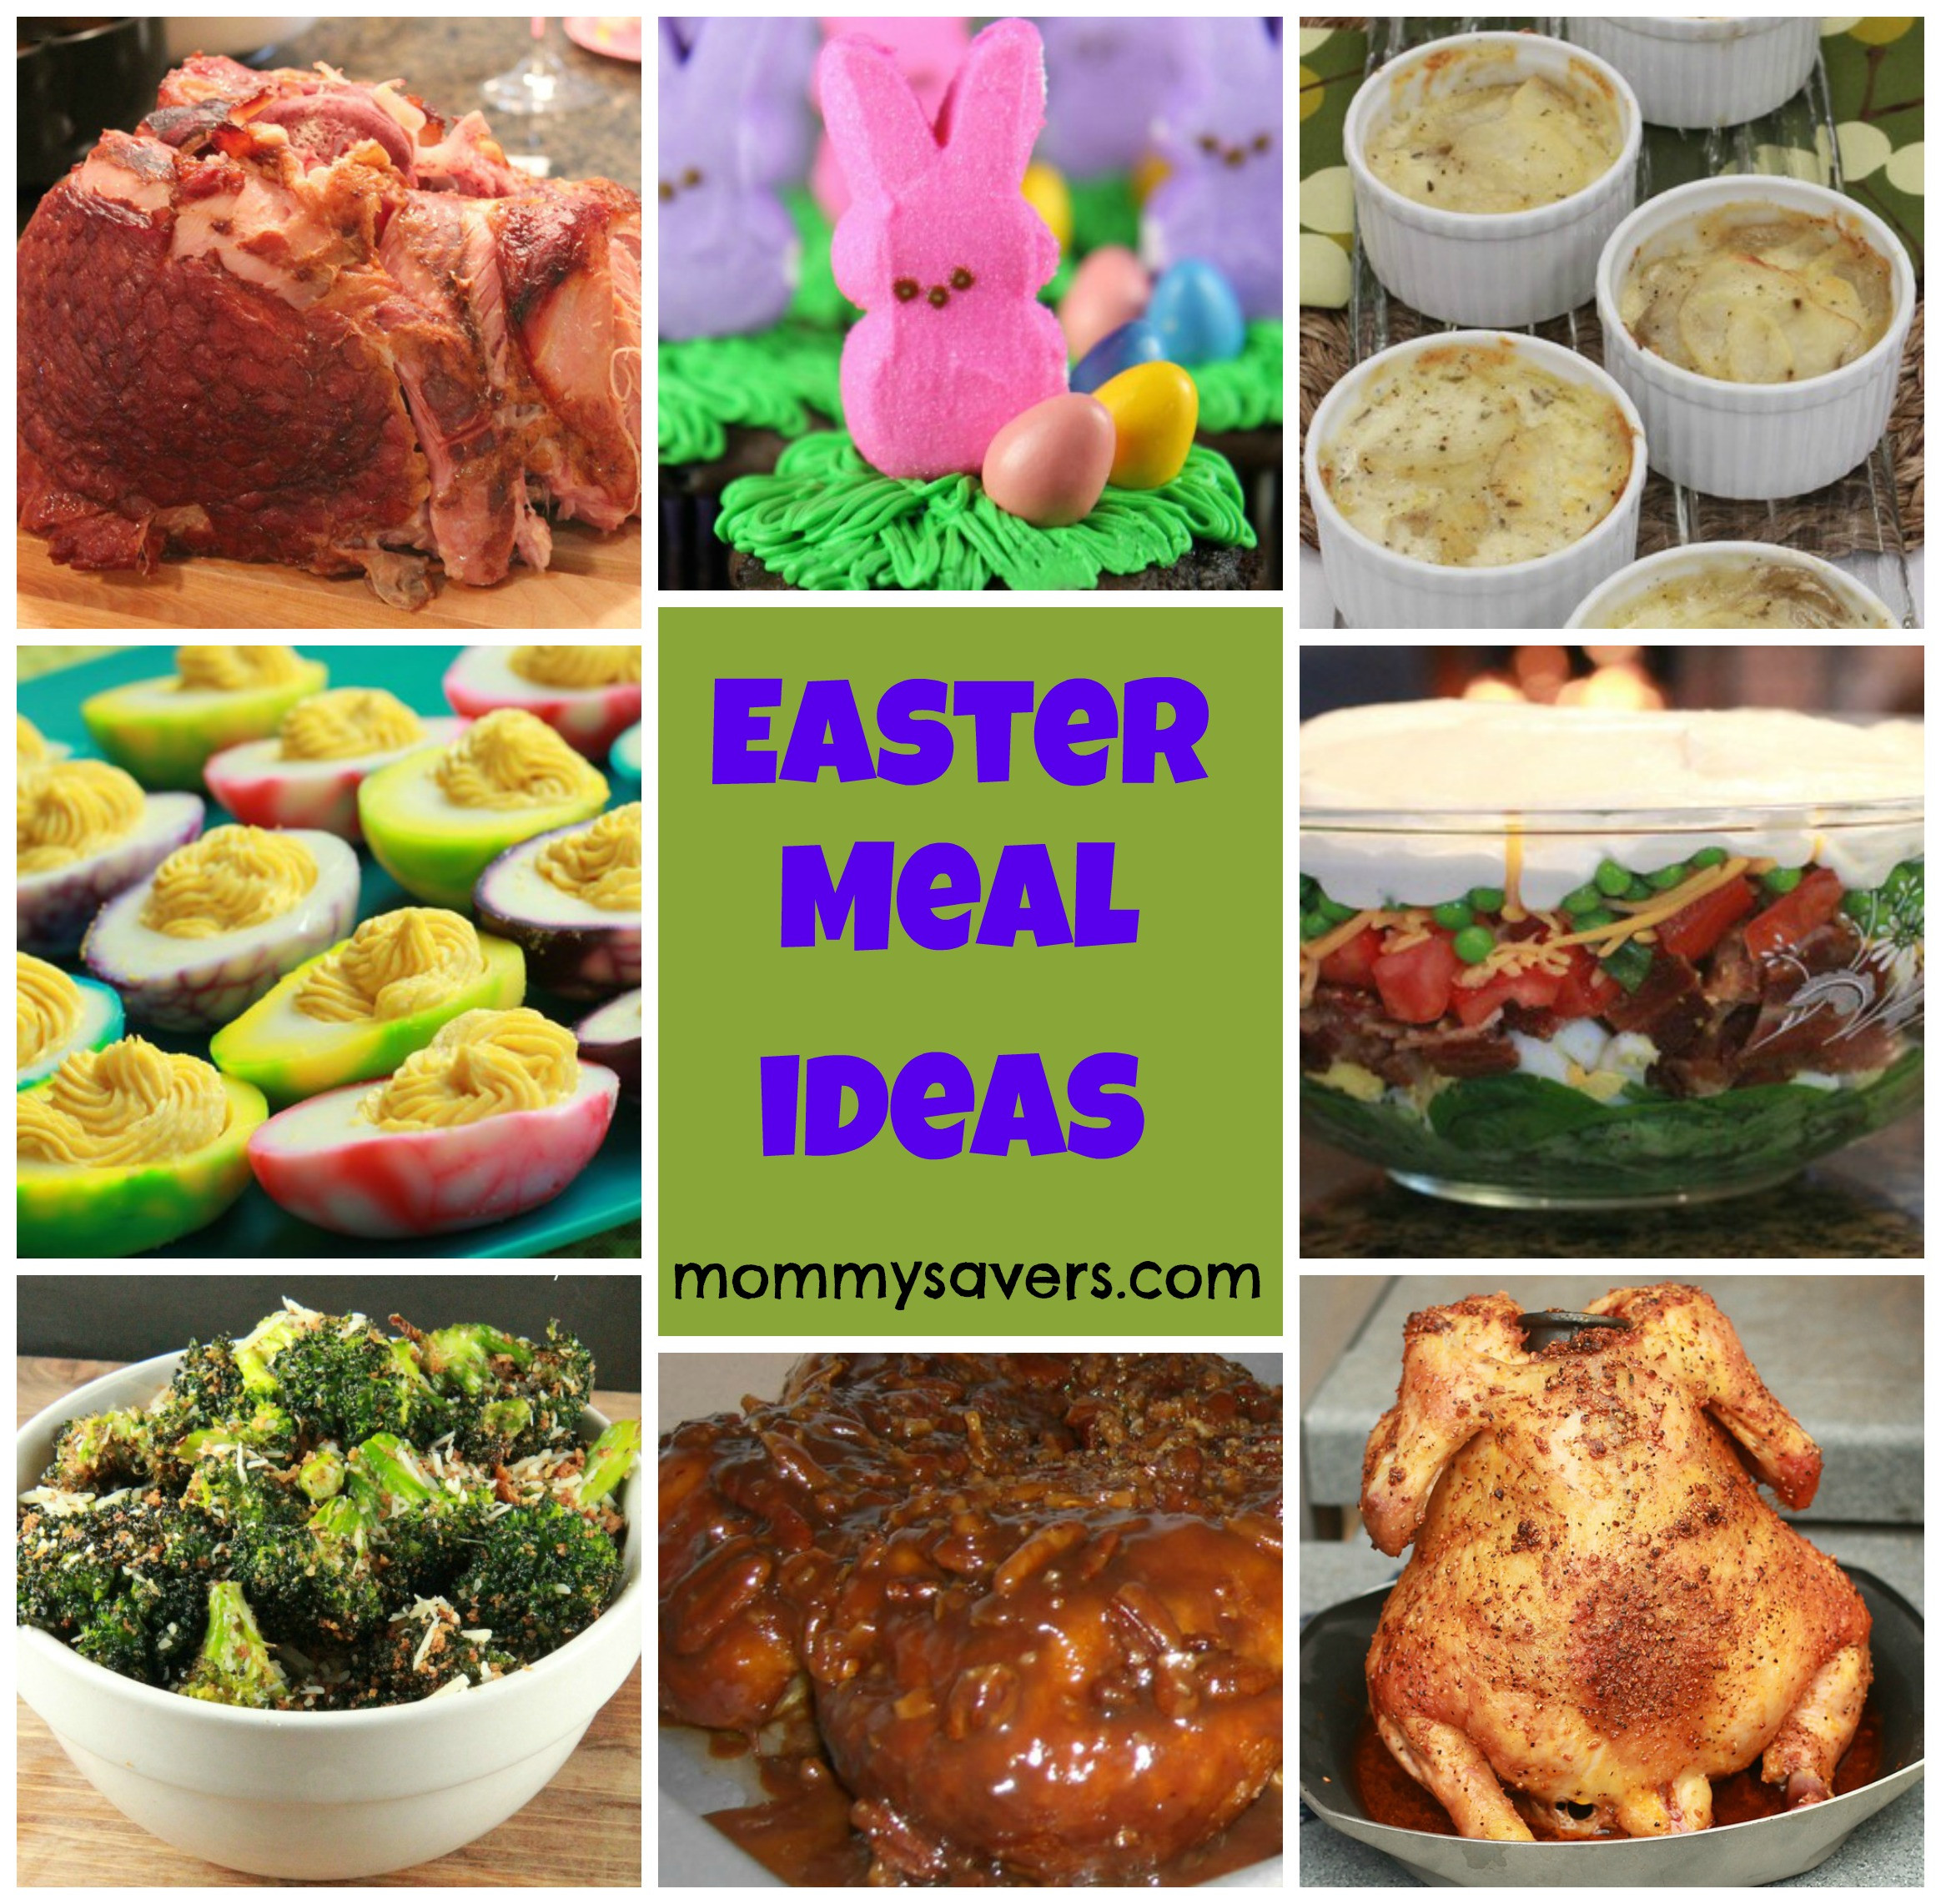 Easter Meal Ideas
 Easter Meal Ideas Mommysavers